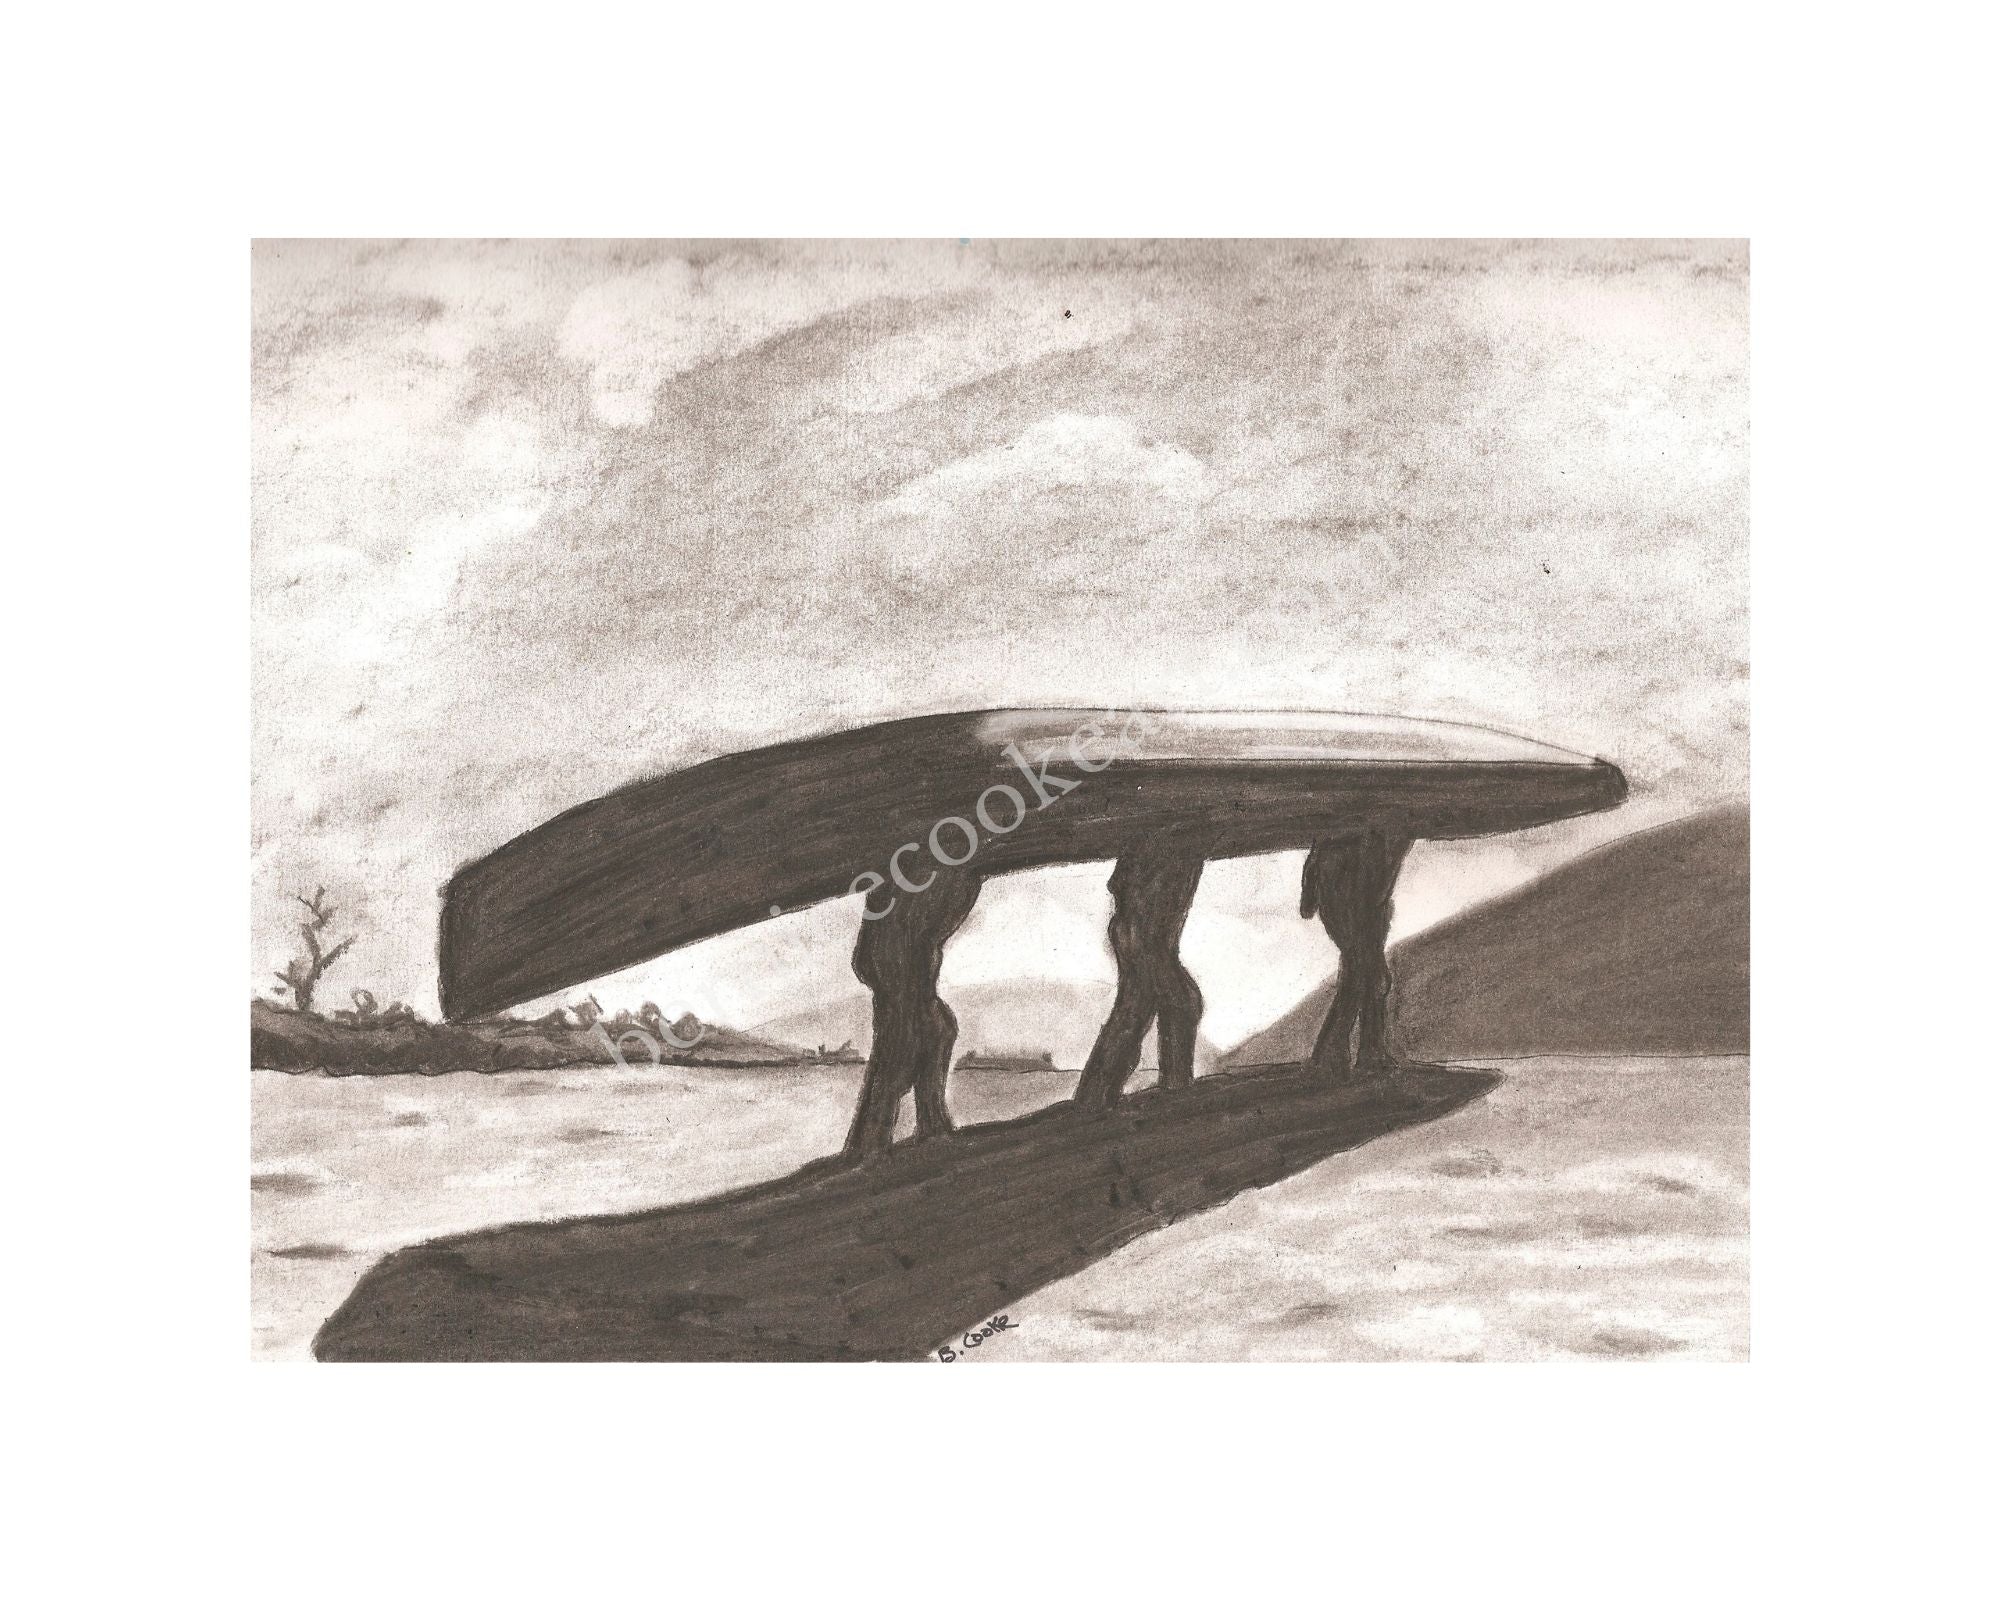 The Galway Currach - Graphite, Pencil & Charcoal Sketch - Giclée Print by Bernice Cooke - Mounted to 10" x 8".